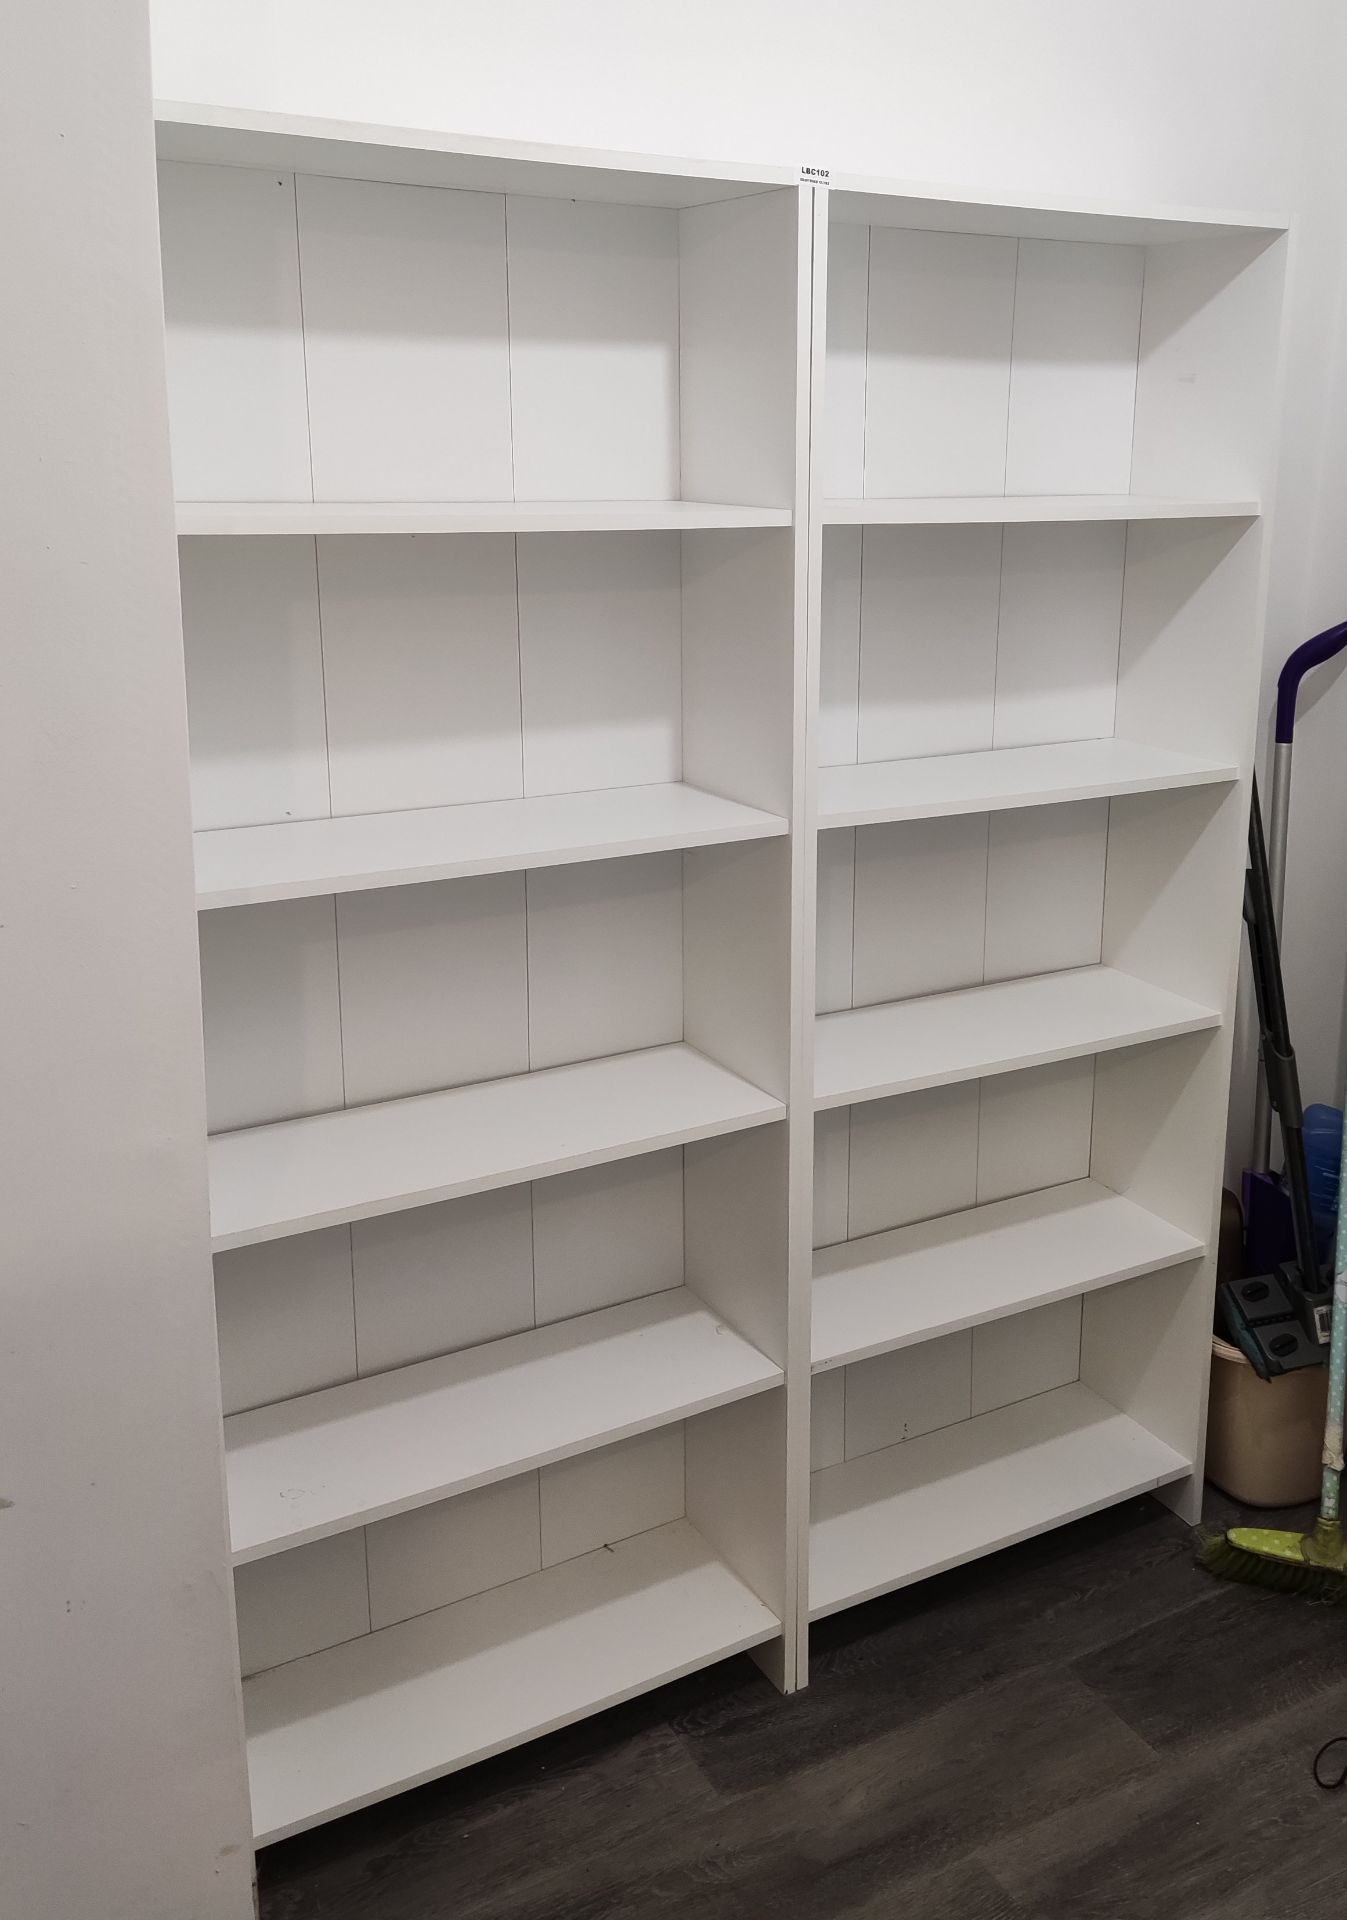 Pair of Tall White Wooden Display Shelving Units - LBC102 - CL763- Location: Sale M33Dimensi - Image 2 of 3